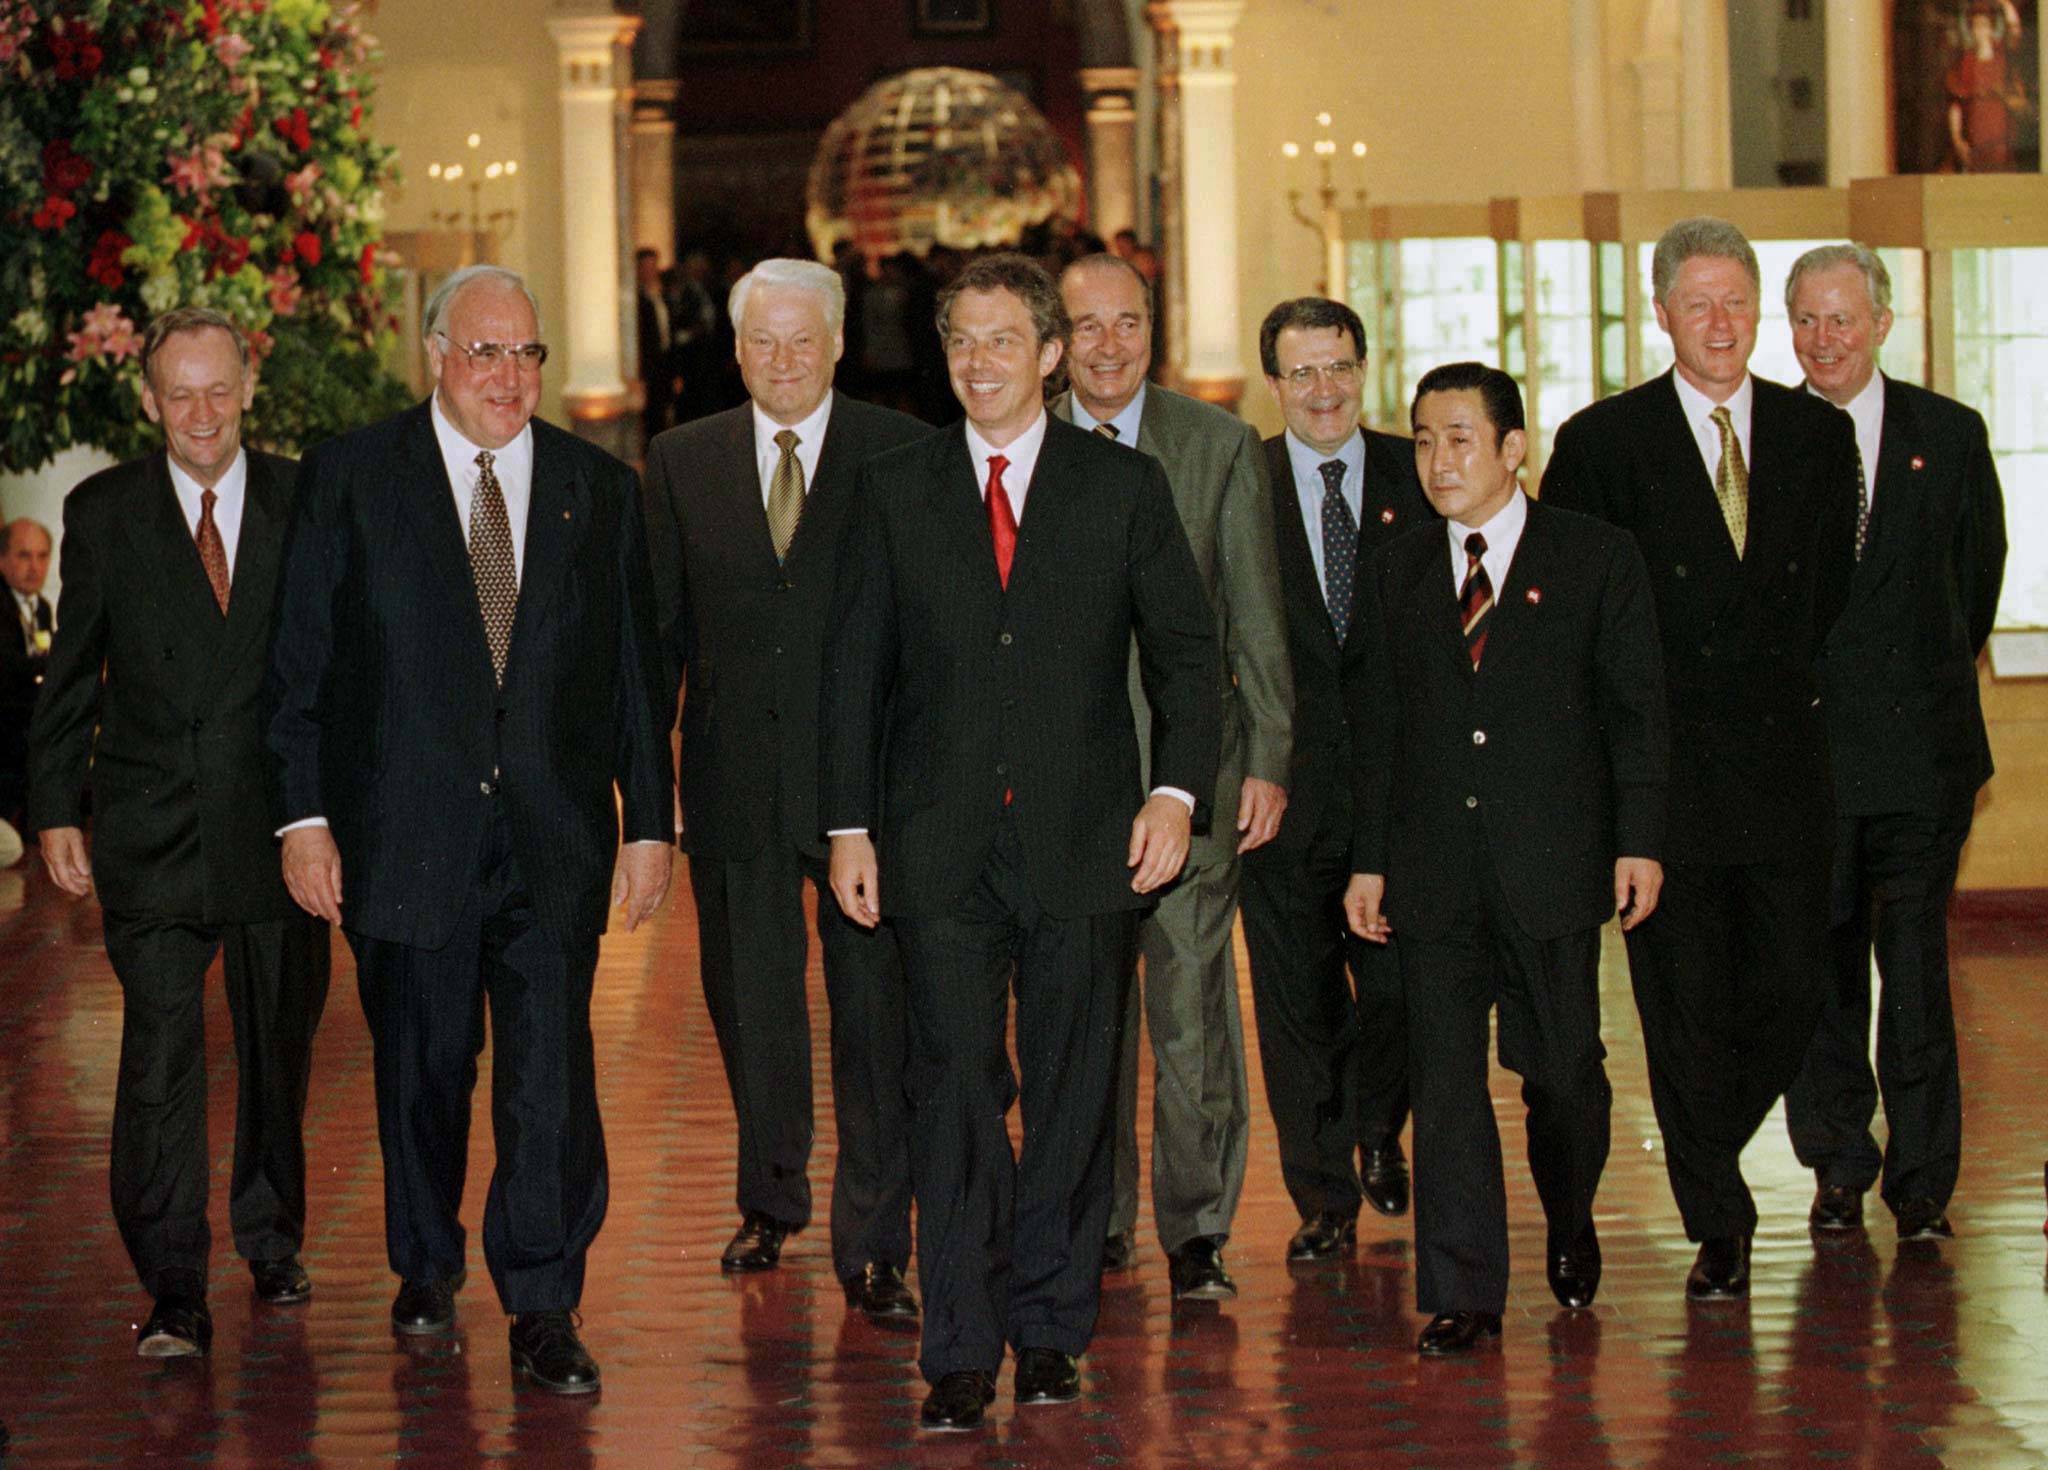 The May 1998 G8 Summit in Birmingham marked Russia's first full participation in the group previously known as the G7. | REUTERS